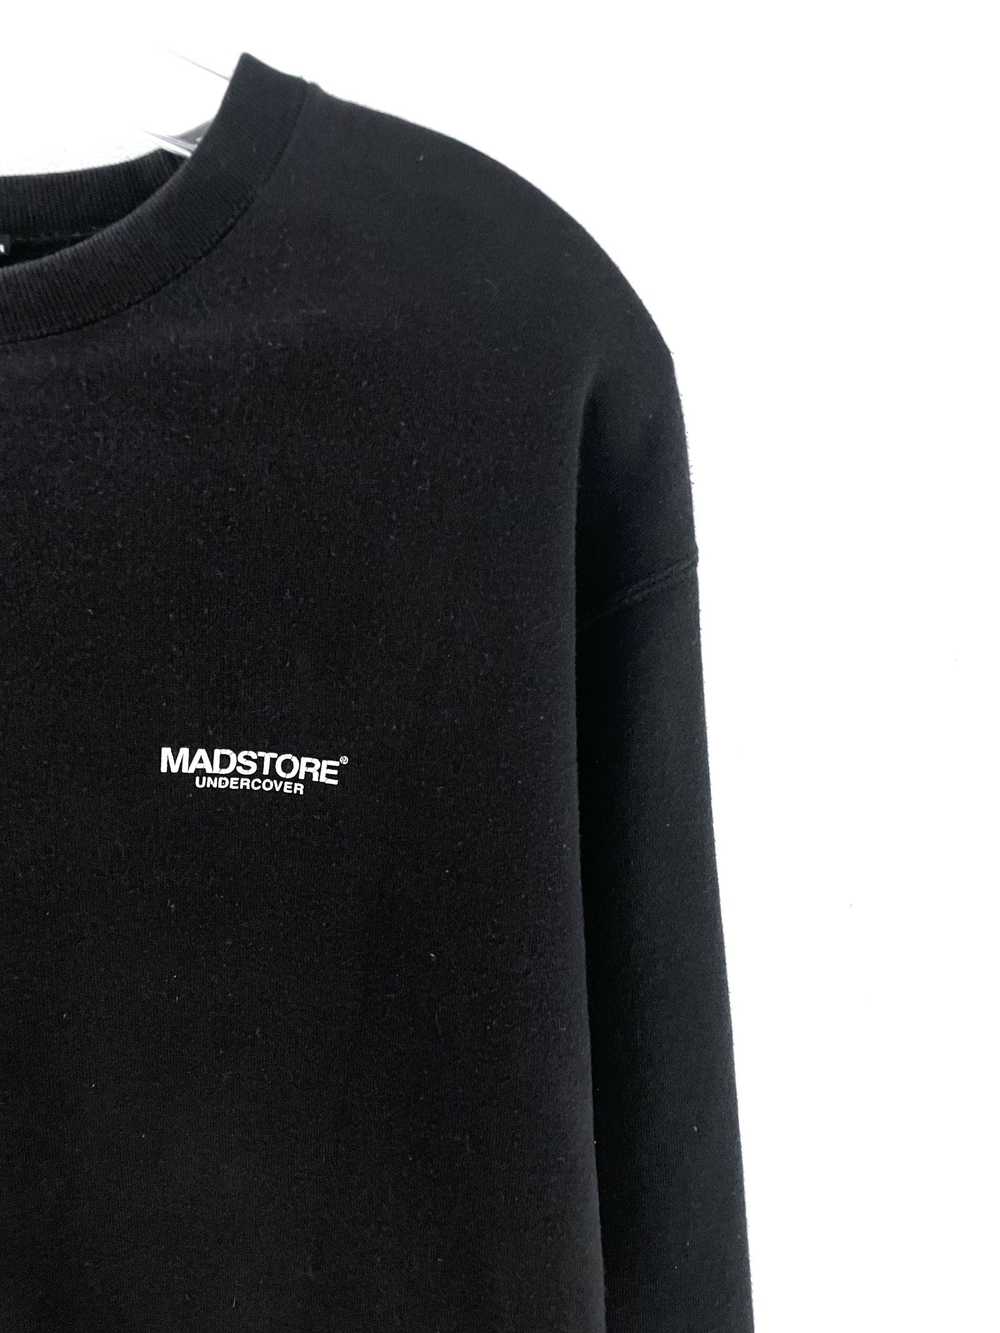 Undercover Mad Dog Sweater - image 7